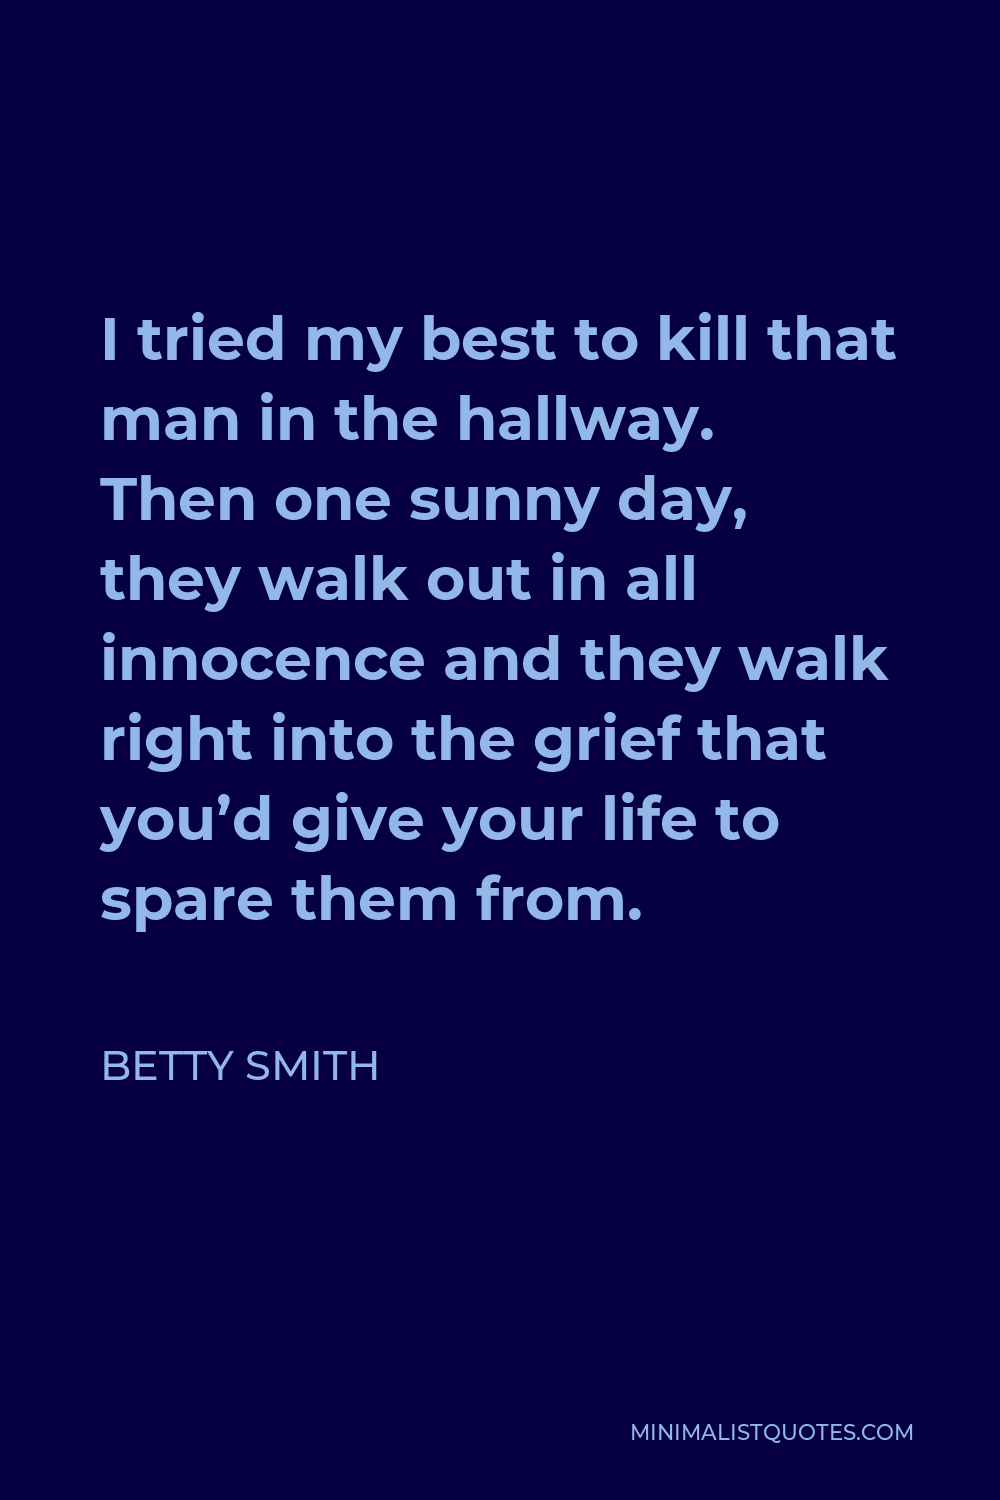 Betty Smith Quote - I tried my best to kill that man in the hallway. Then one sunny day, they walk out in all innocence and they walk right into the grief that you’d give your life to spare them from.